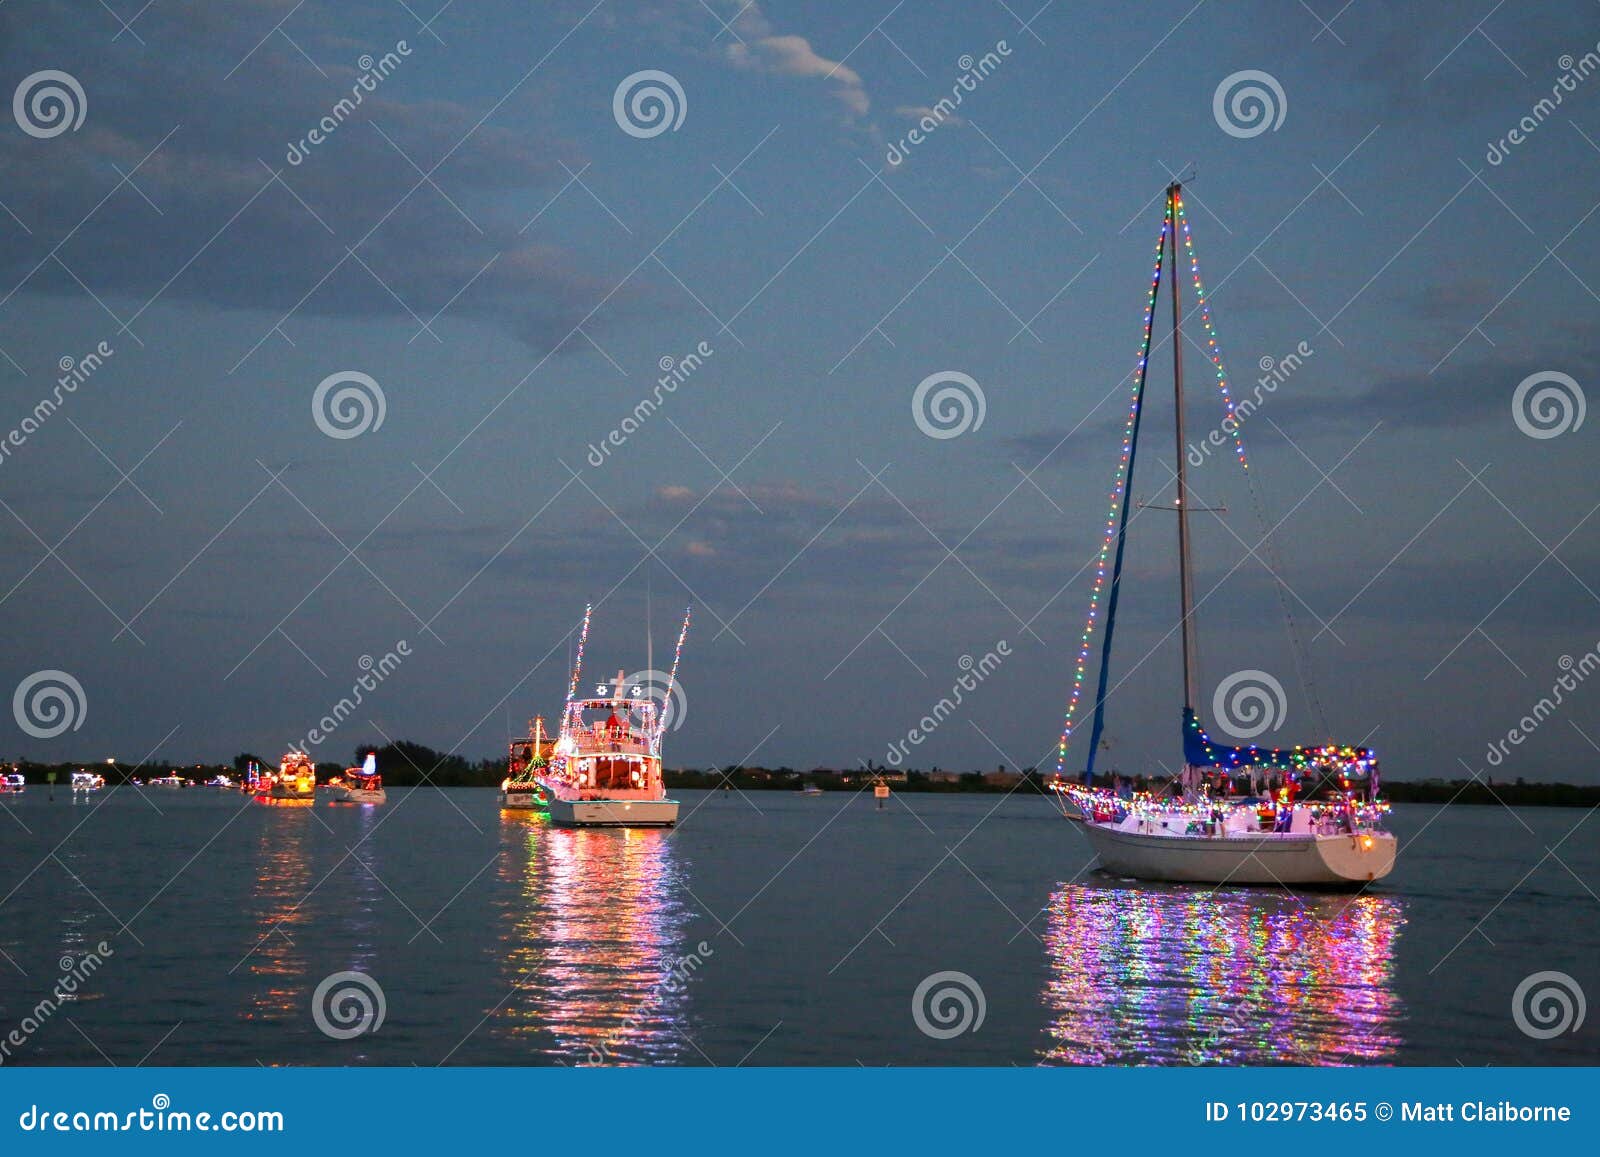 power and sailboats participate in a holida boat parade